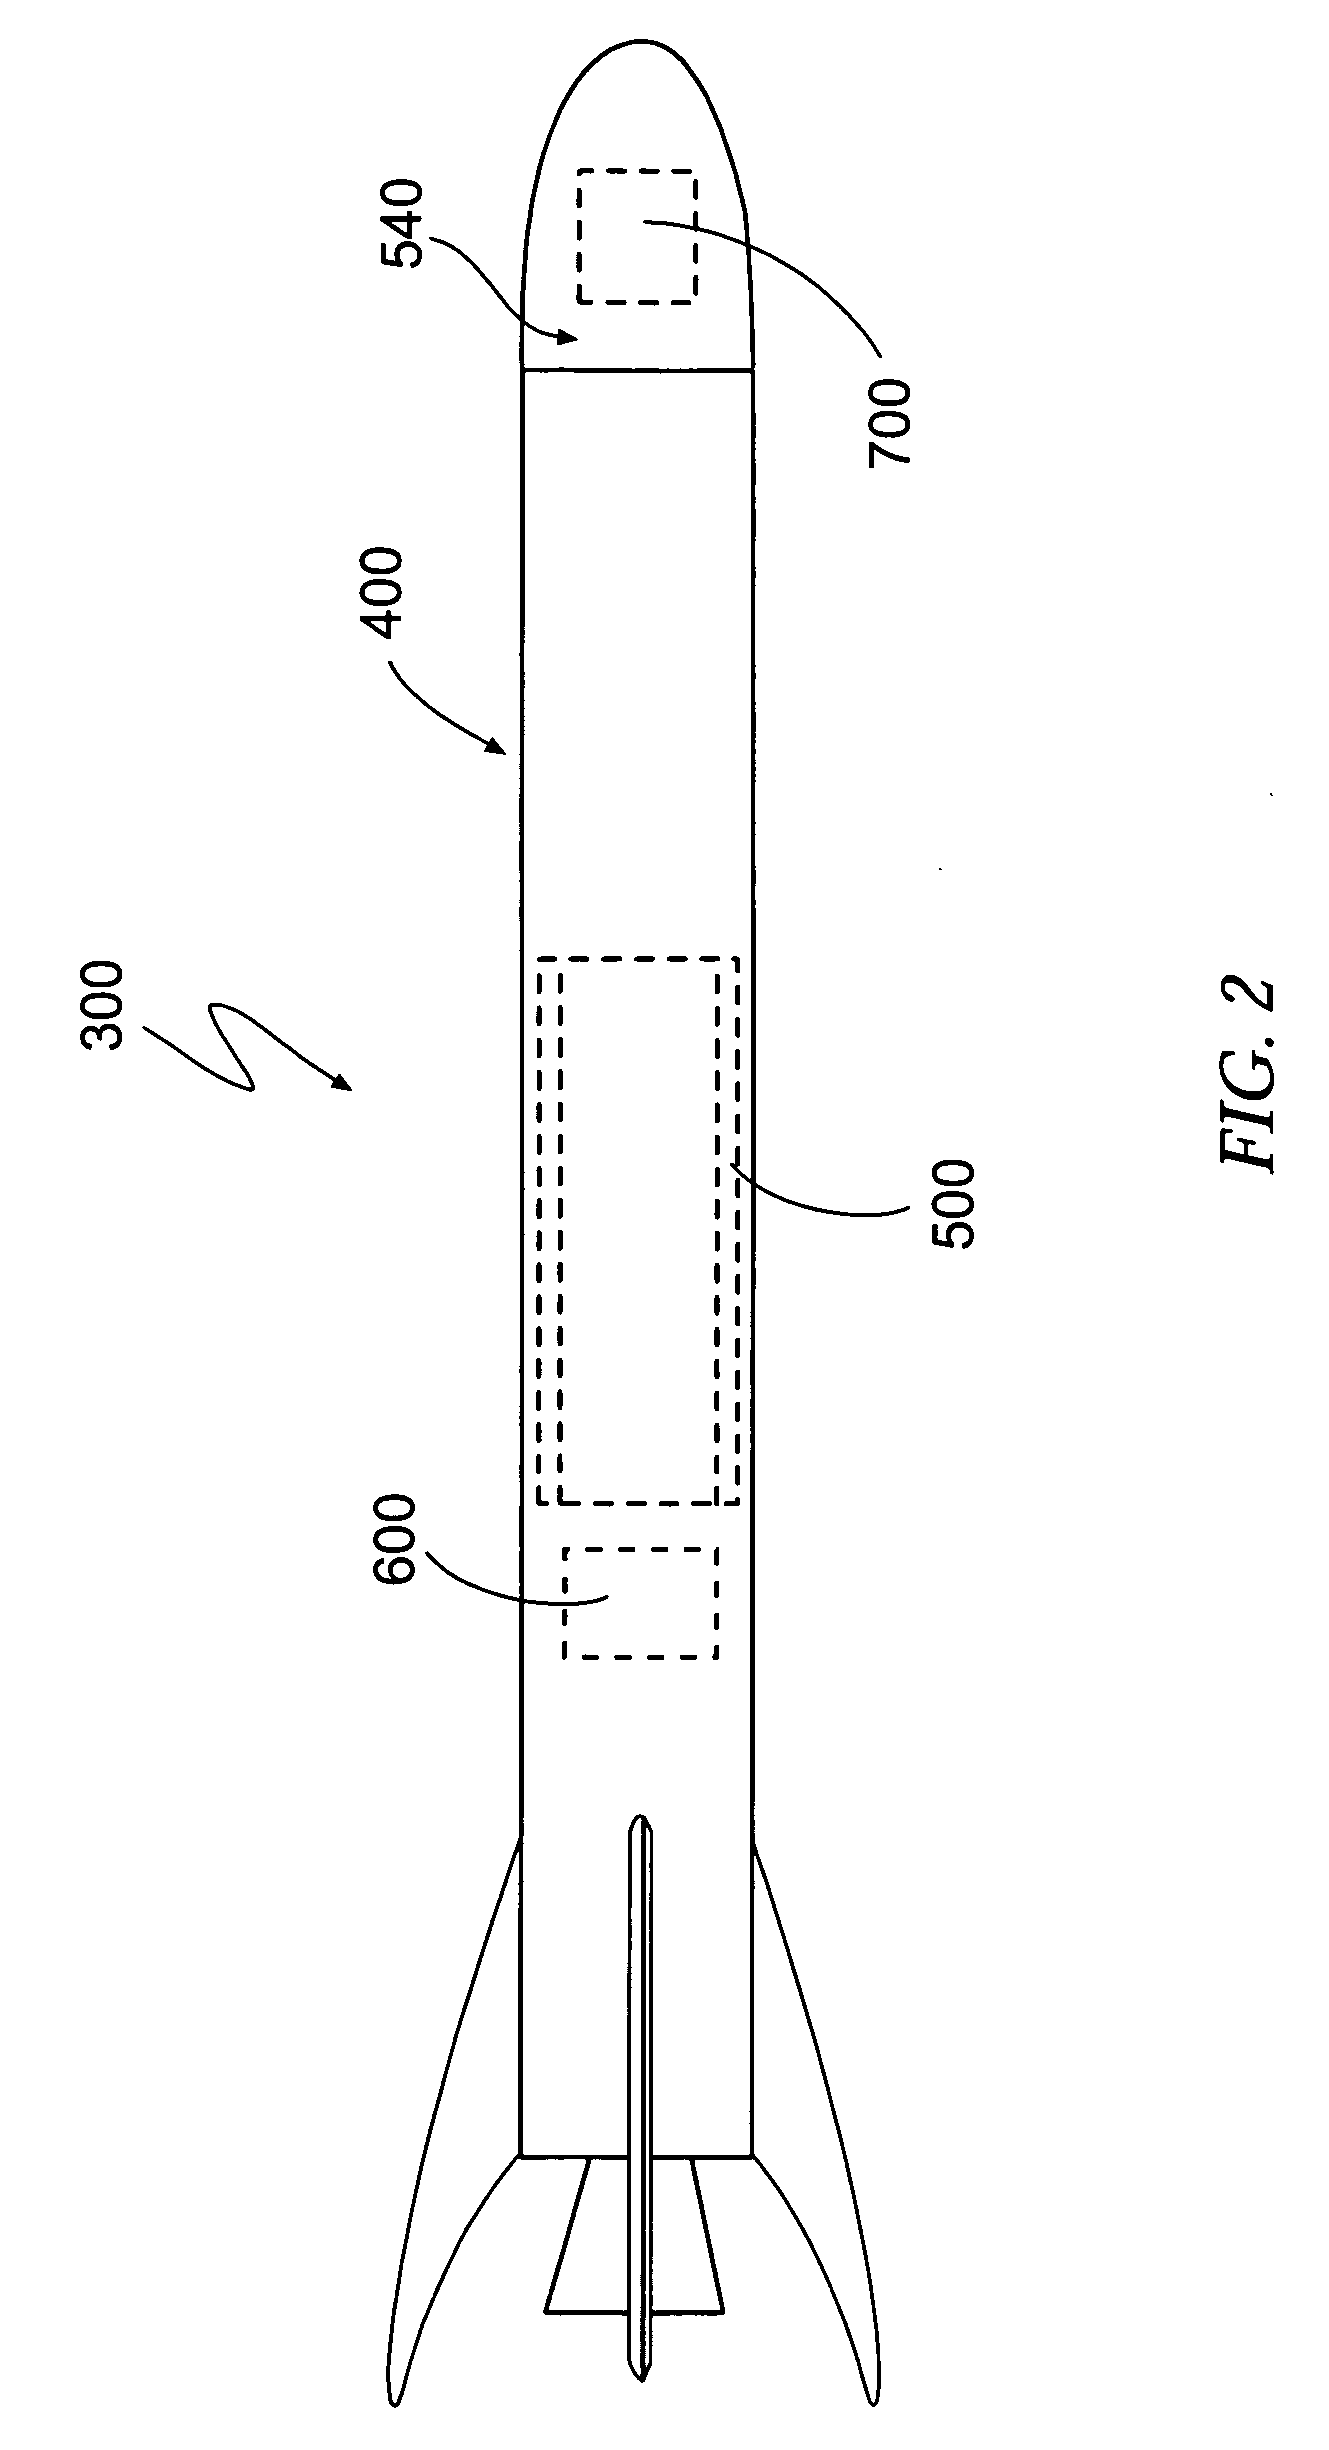 Active protection device and associated apparatus, system, and method